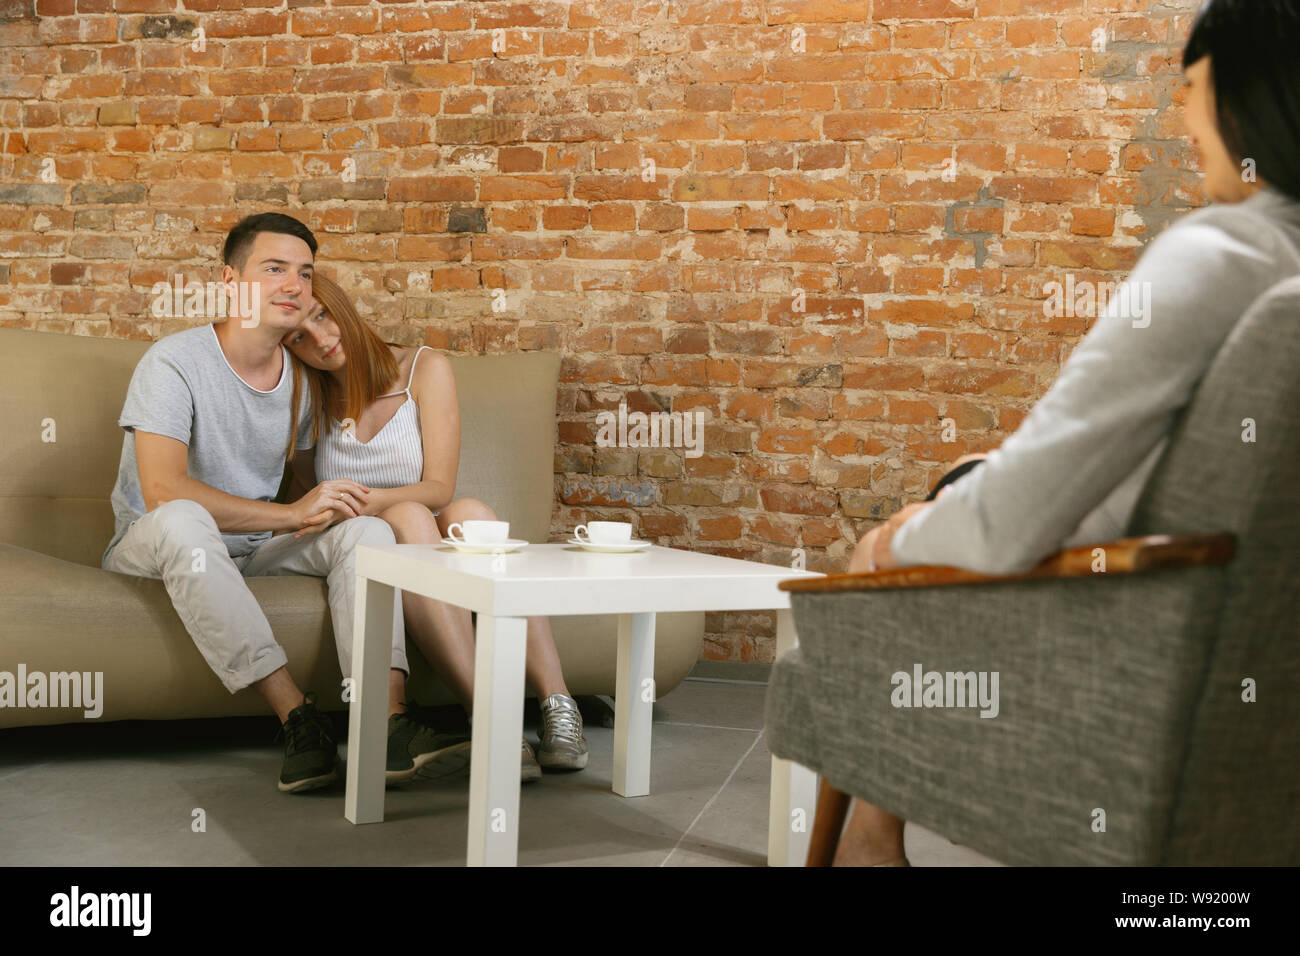 Couple in therapy or marriage counseling. Psychologist, counselor, therapist or relationship consultant giving advice. Man and woman sitting on a psychotherapy session. Family, mental health concept. Stock Photo